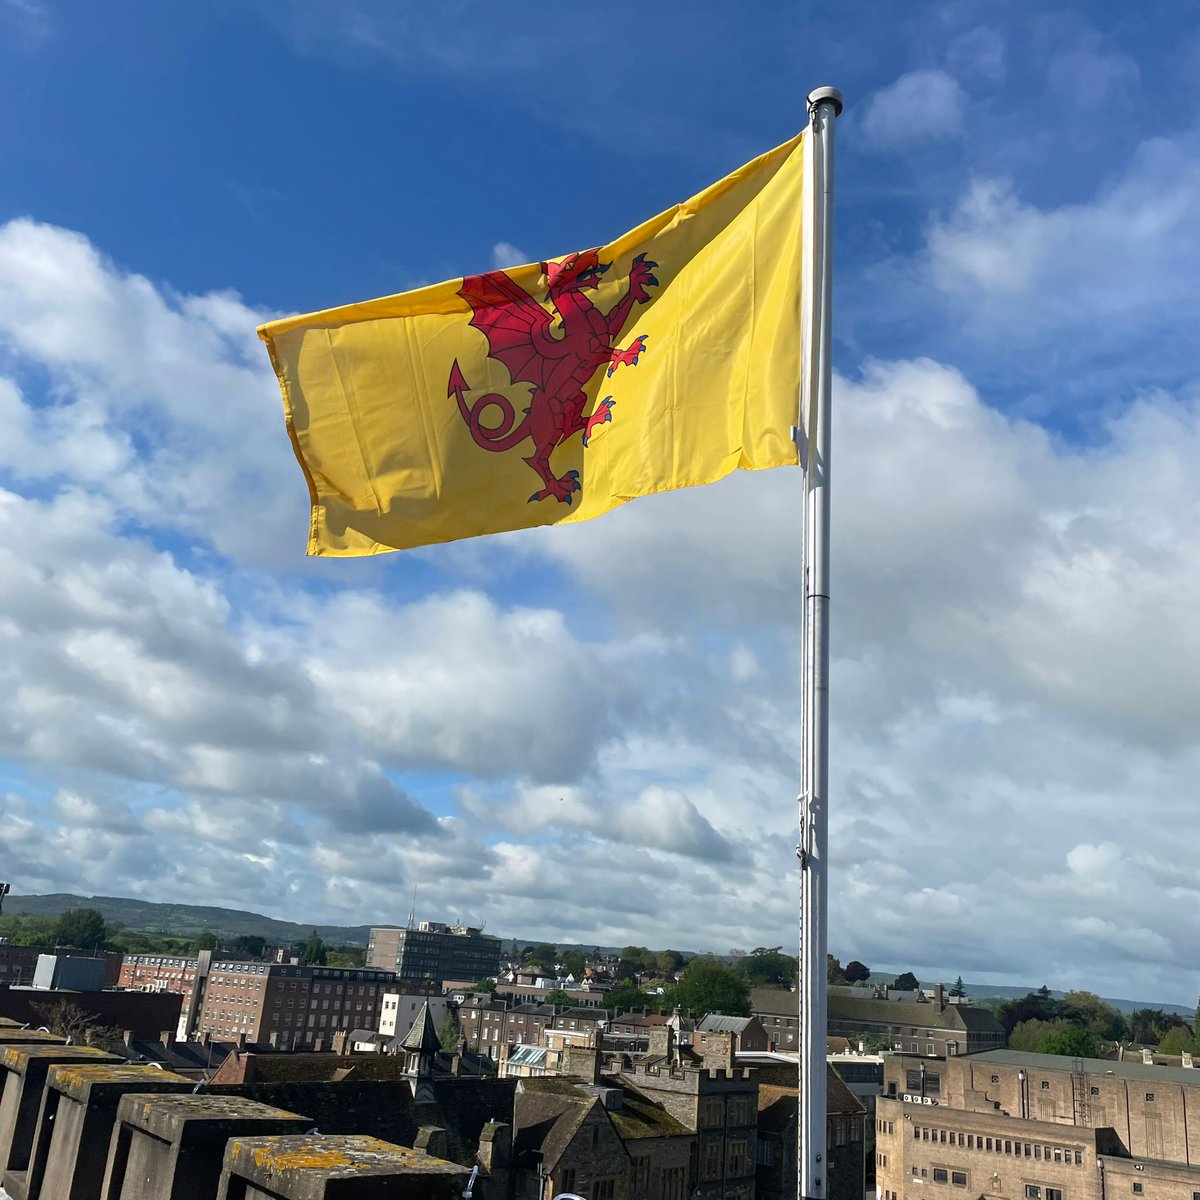 Here at The Castle, we have always been proud of our Somerset Heritage, shouting loud about the people & producers for many years.

We’re delighted to #flytheflag for @SomersetDay today!
-
-
-
-
-
#somersetday2023 #somerset #happysomersetday2023